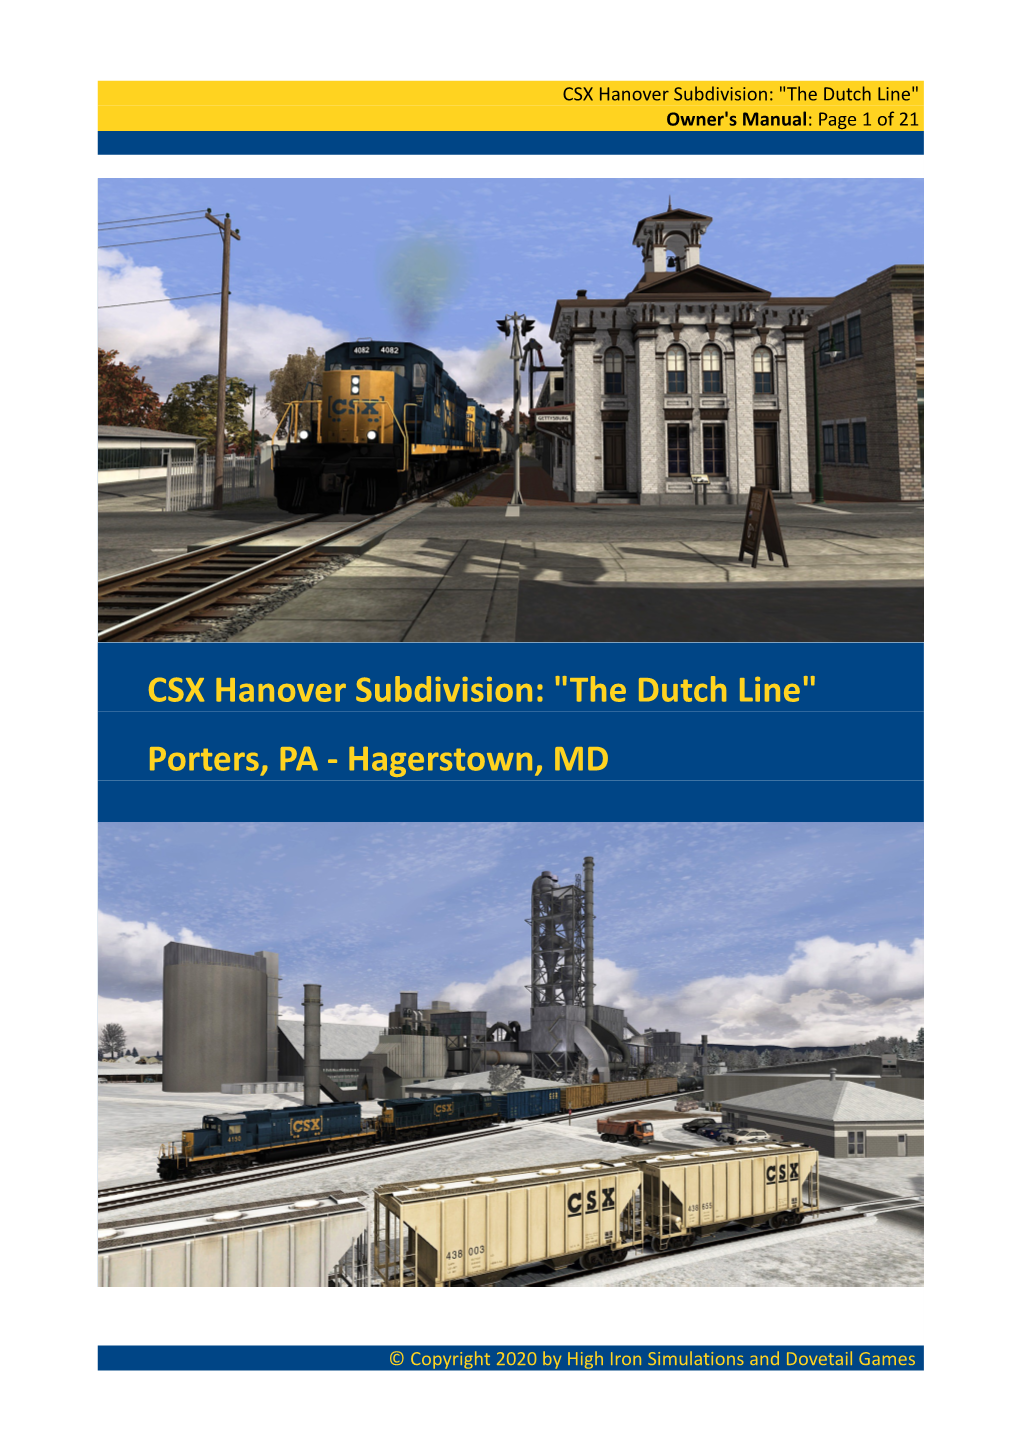 CSX Hanover Subdivision: "The Dutch Line" Owner's Manual: Page 1 of 21